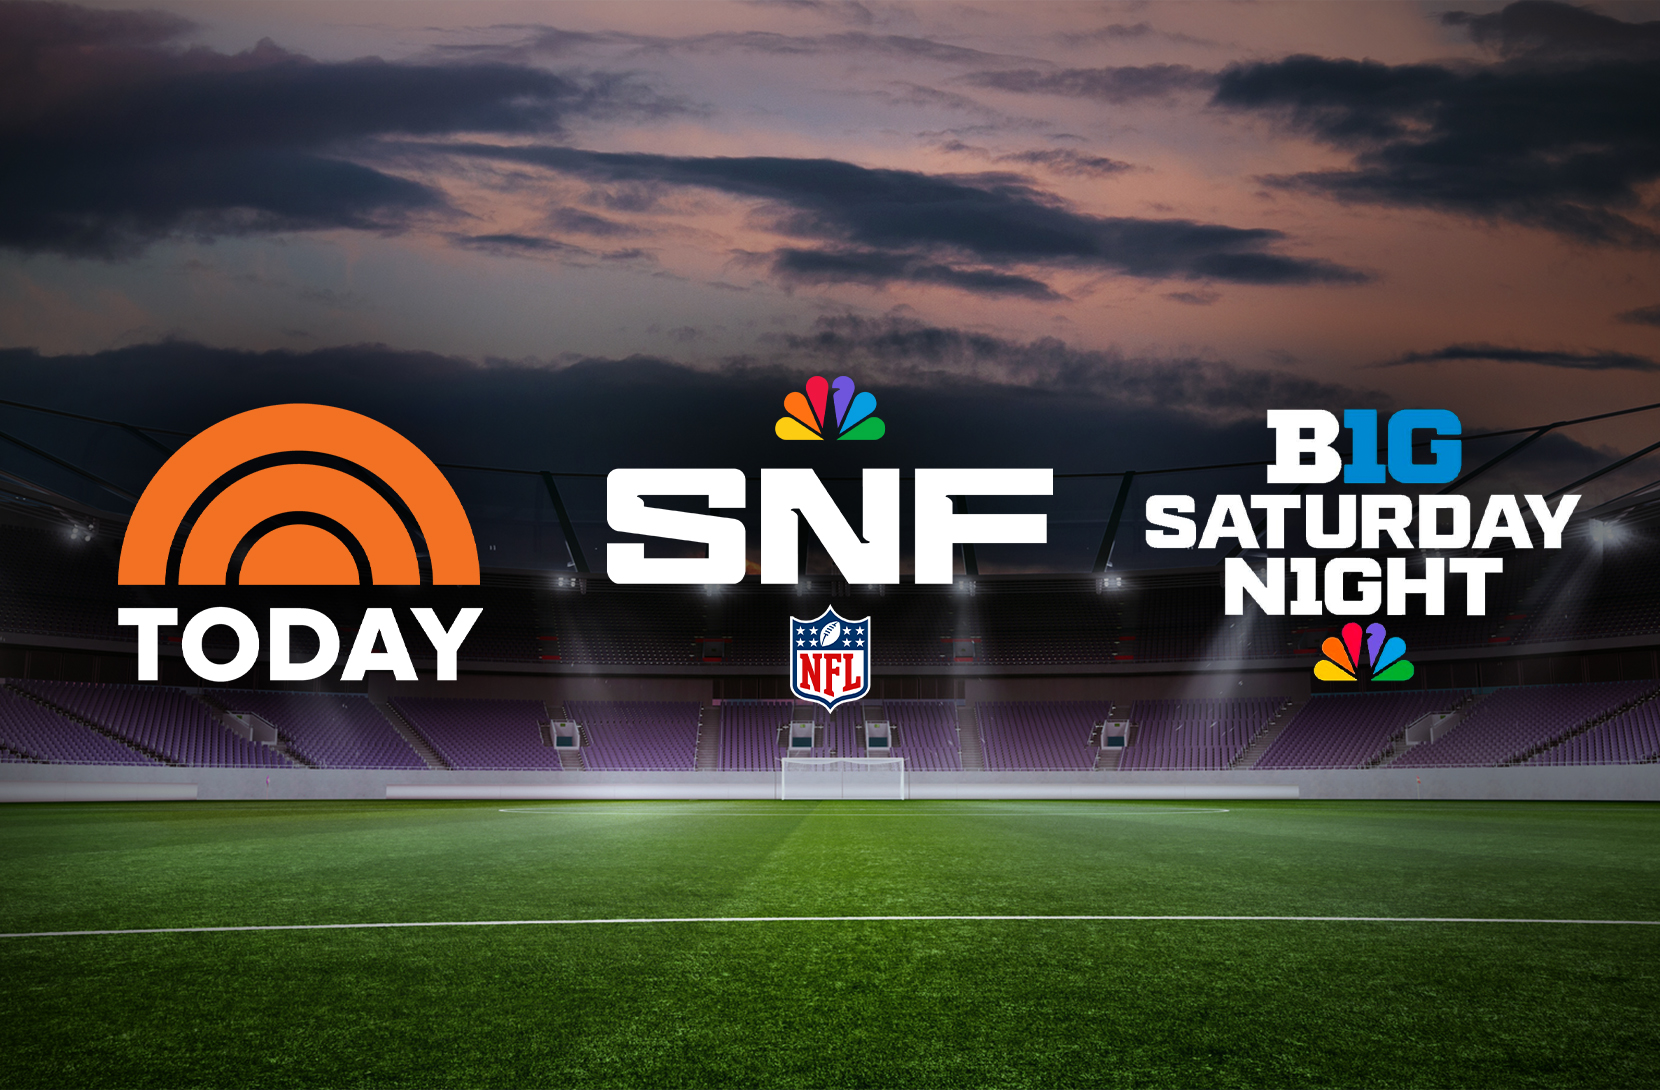 nfl games on labor day weekend